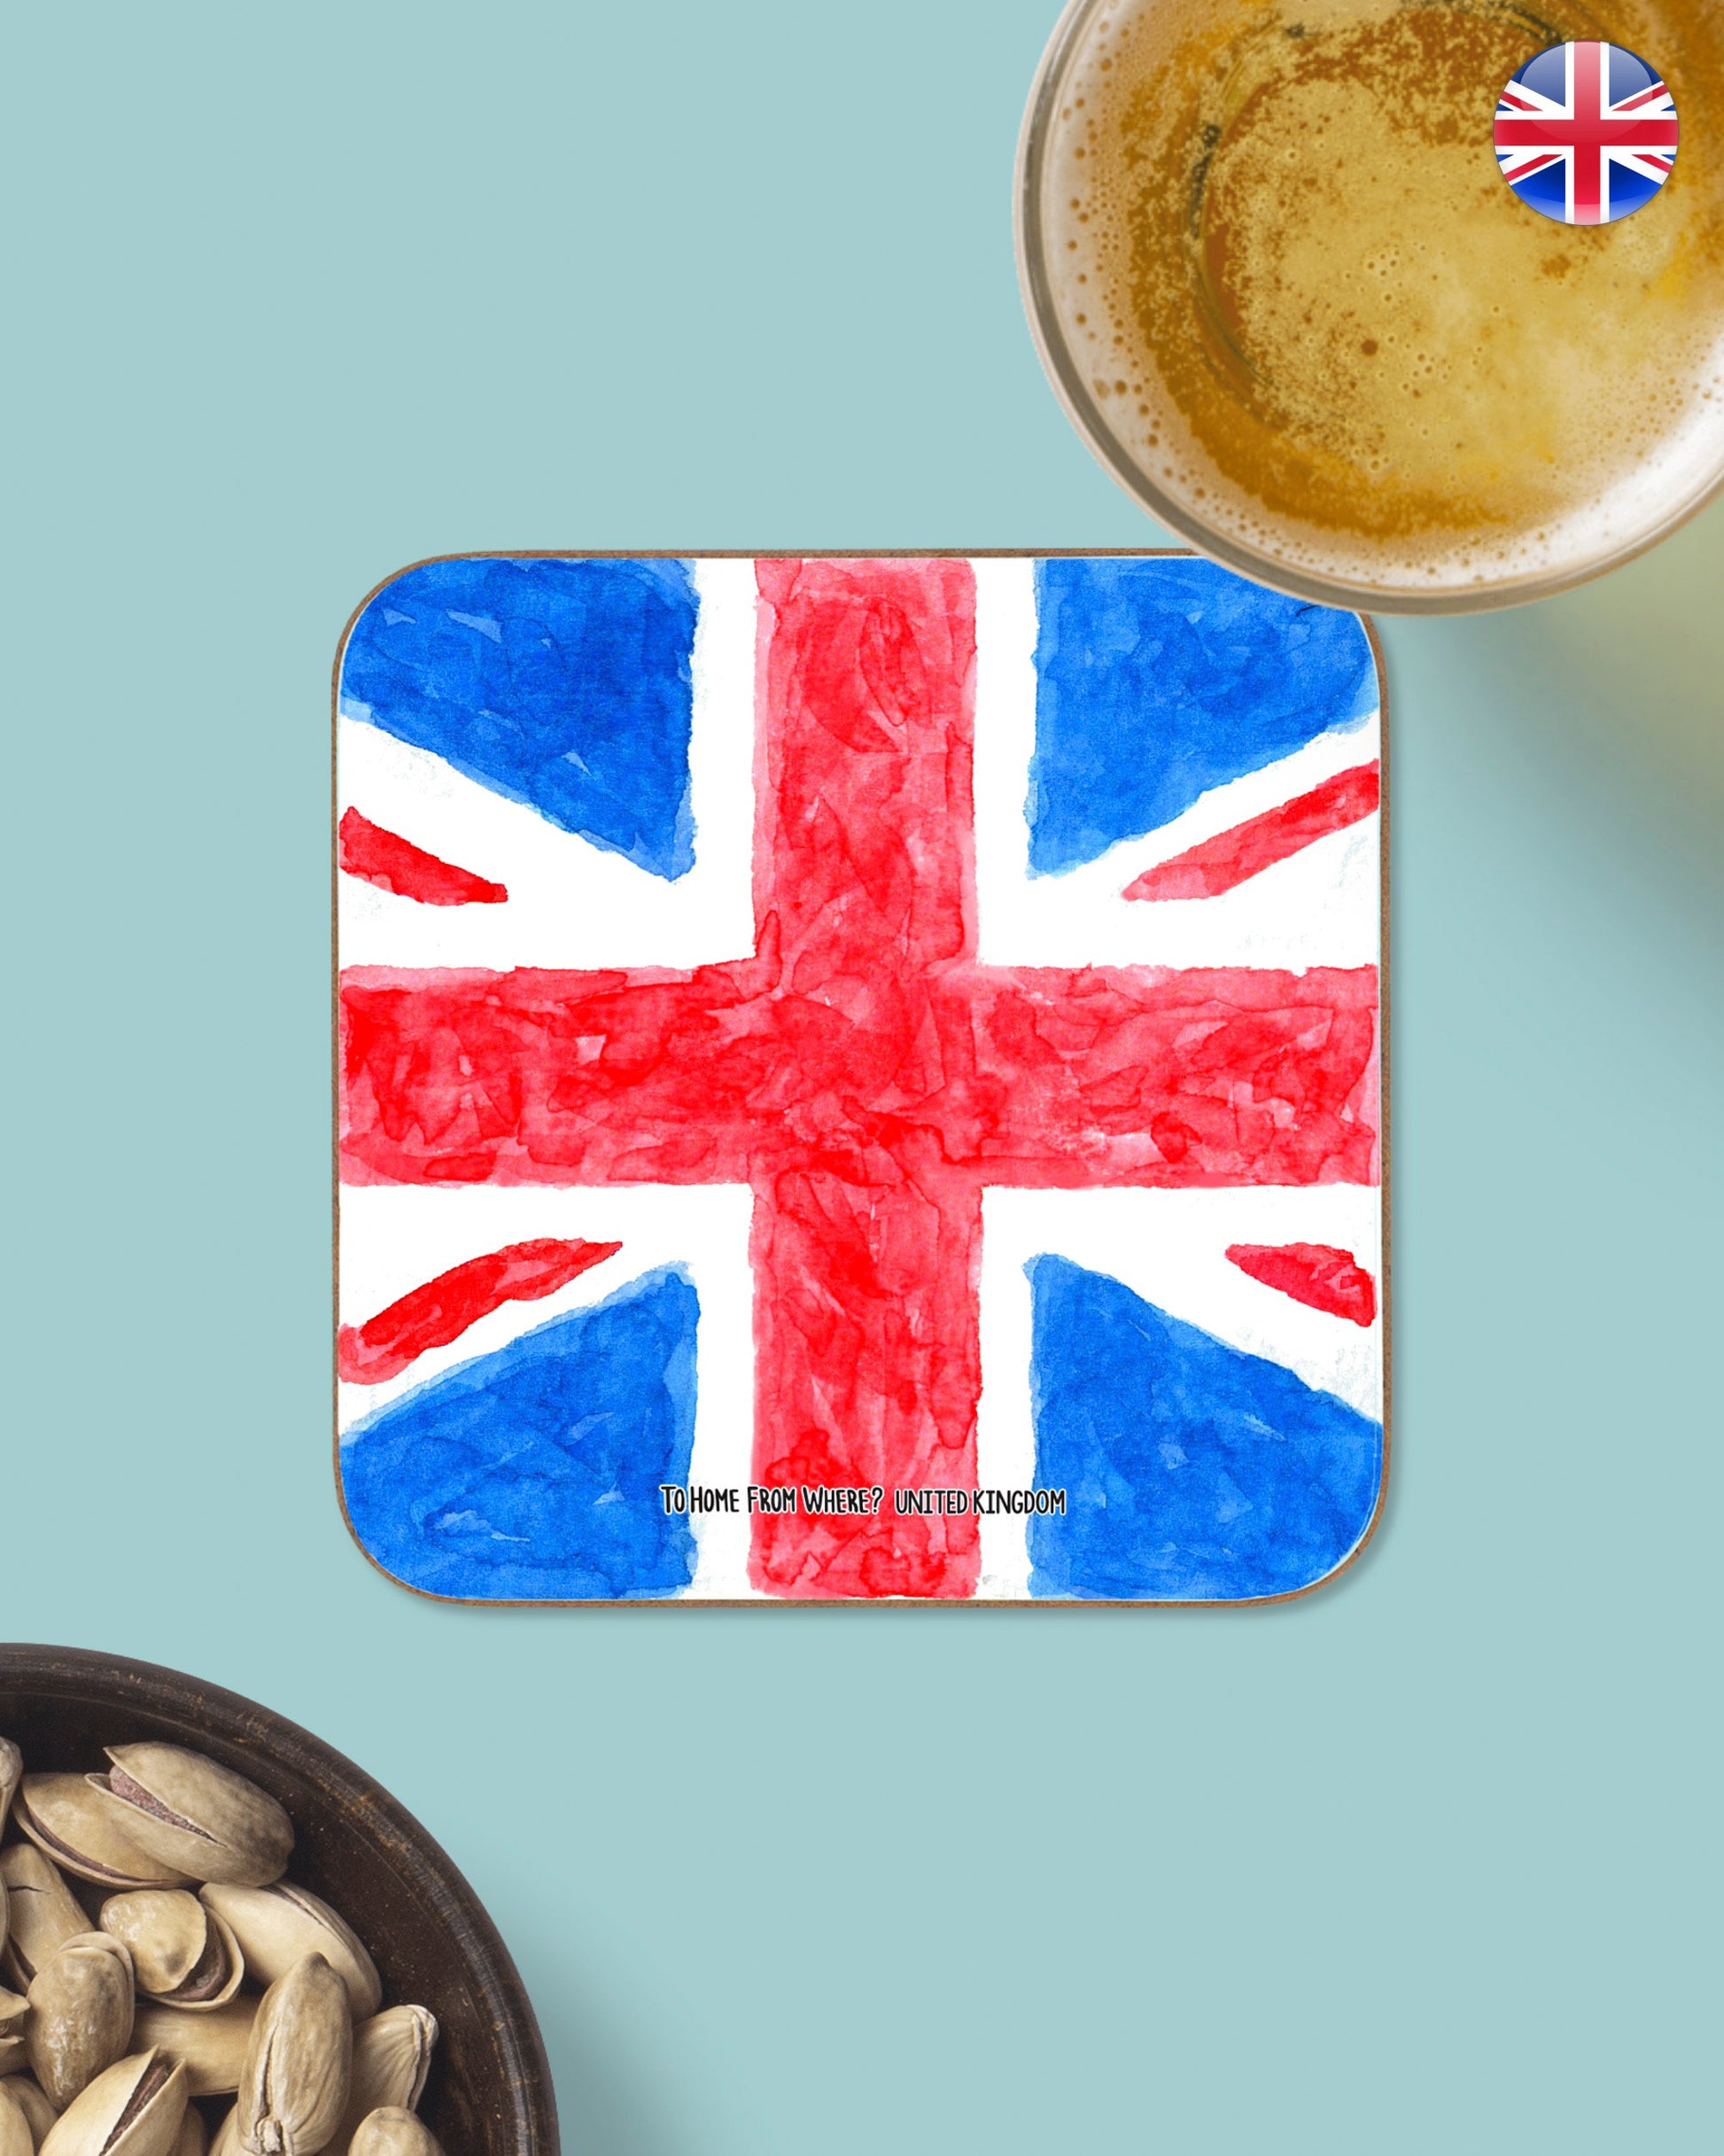 United Kingdom Coasters - To Home From London